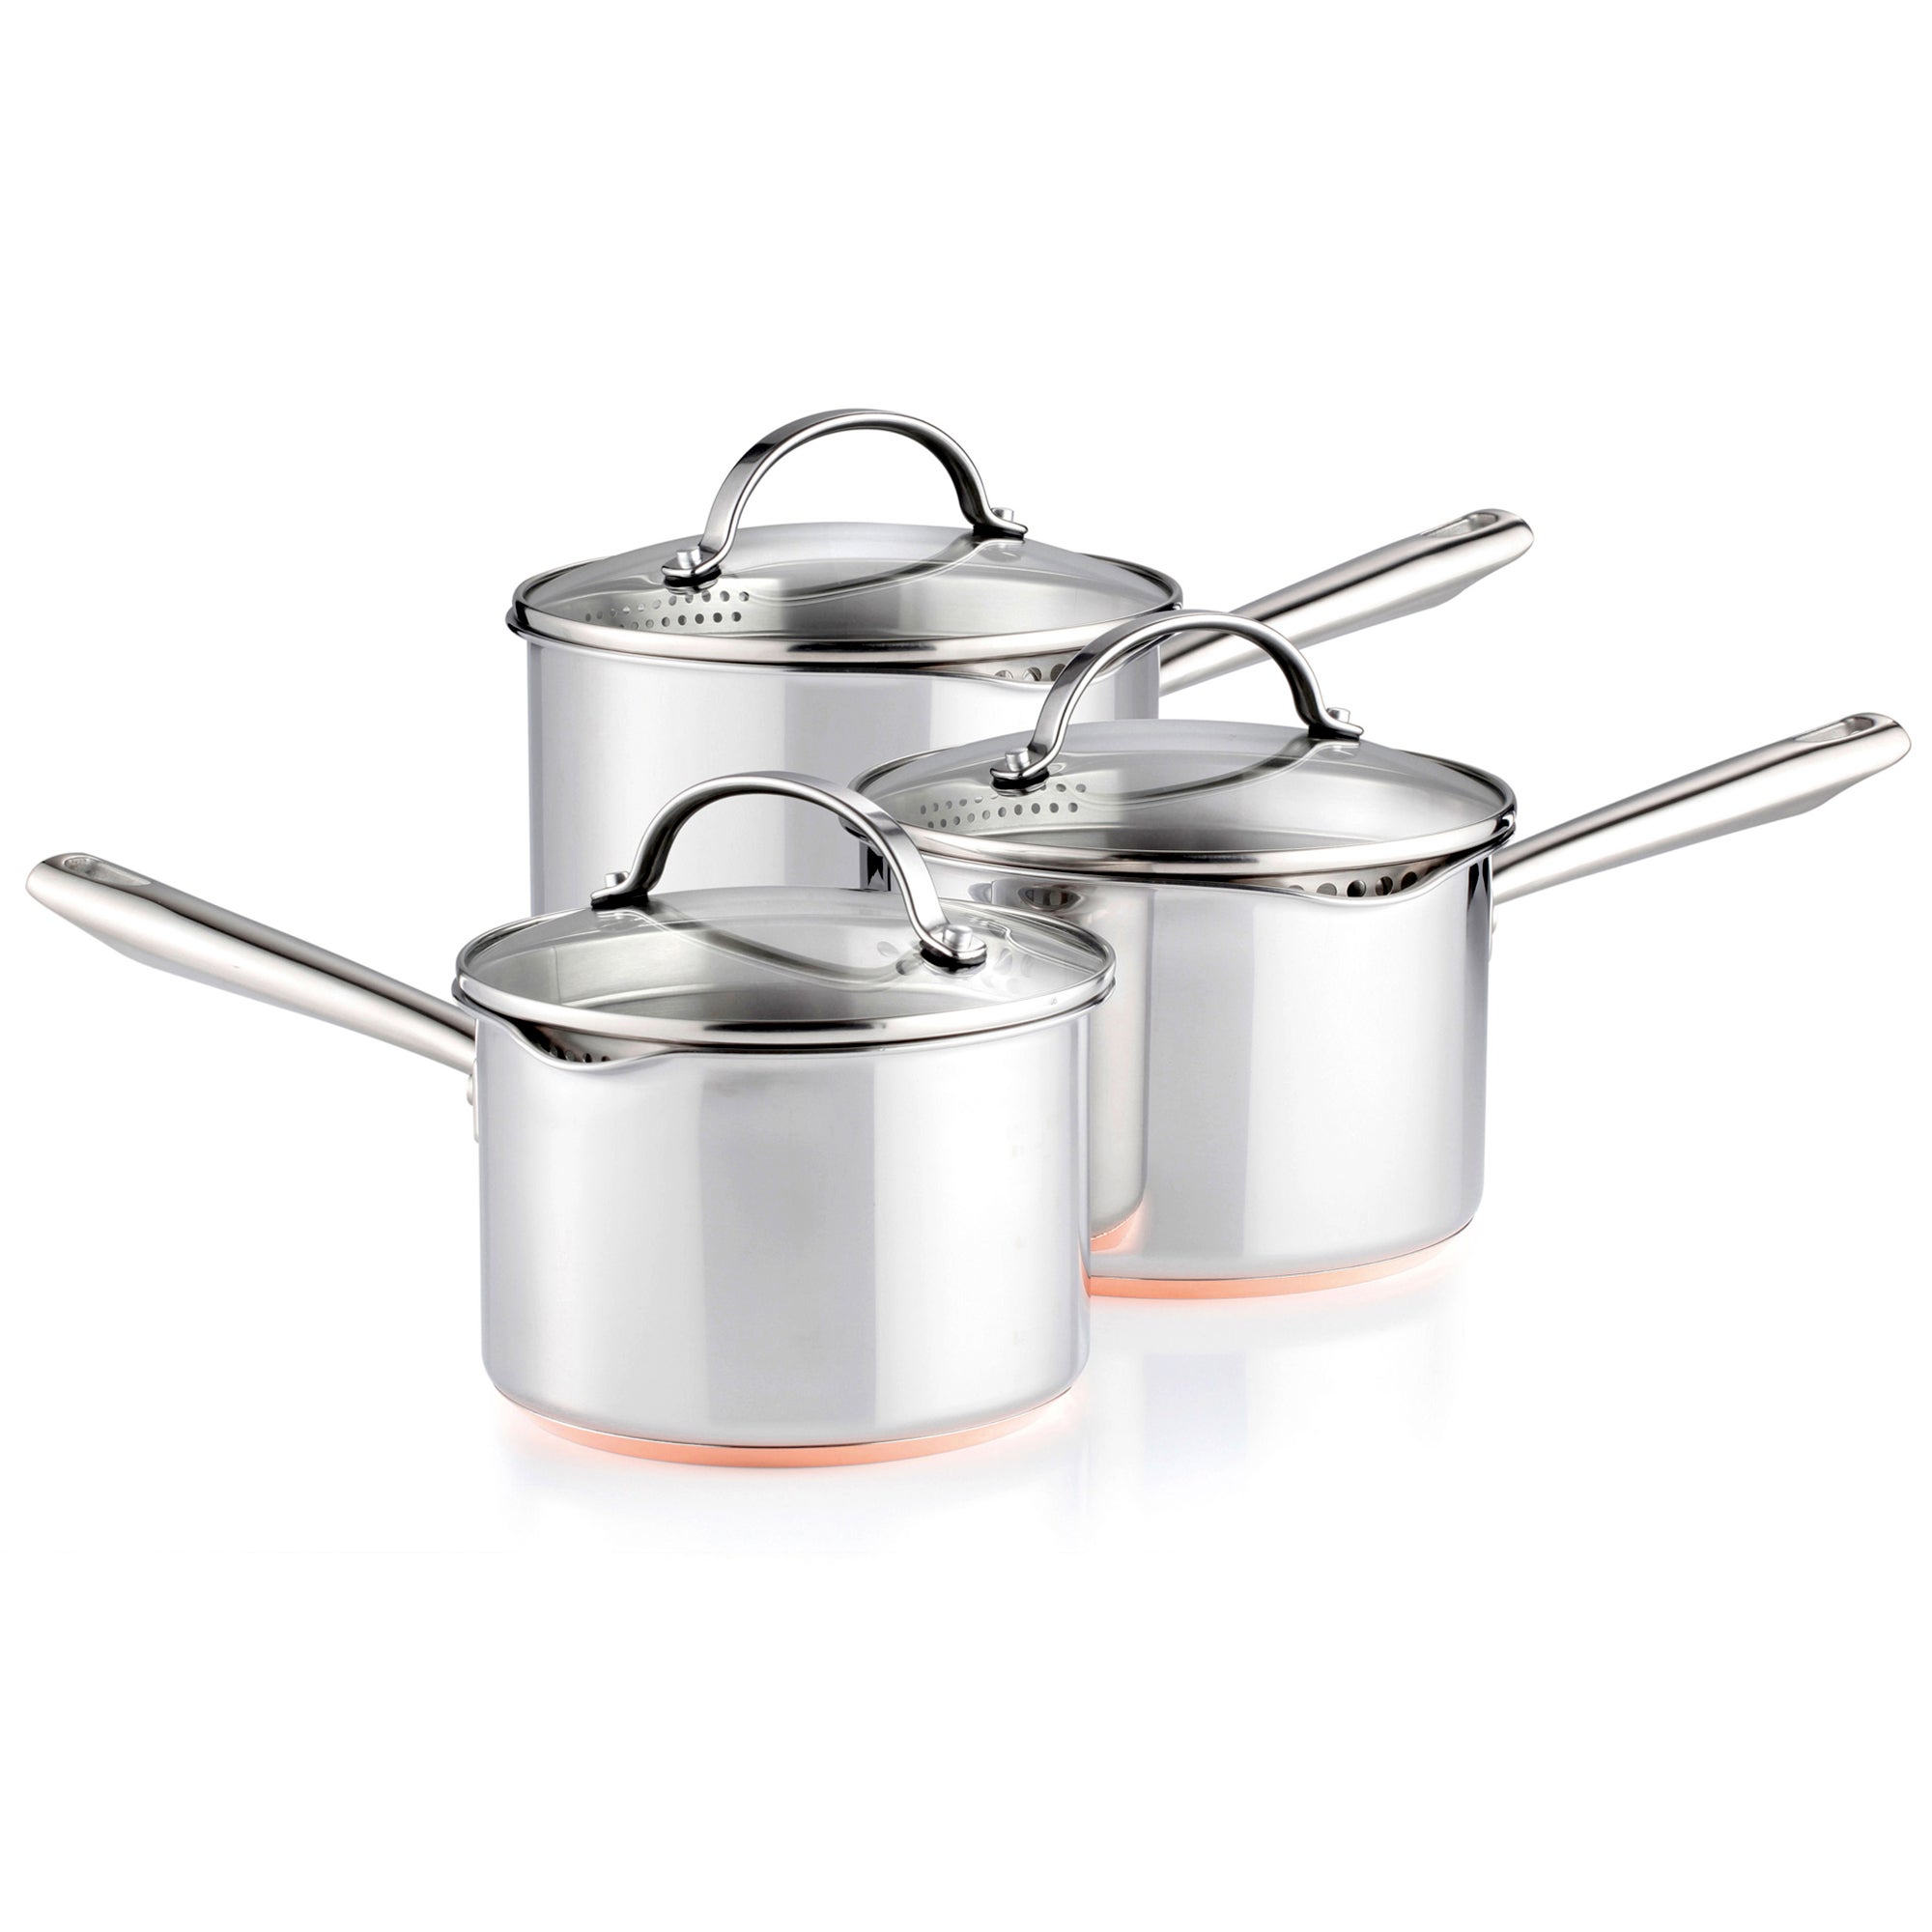 Copper Base Non-Stick Stainless Steel 3 Piece Pan Set